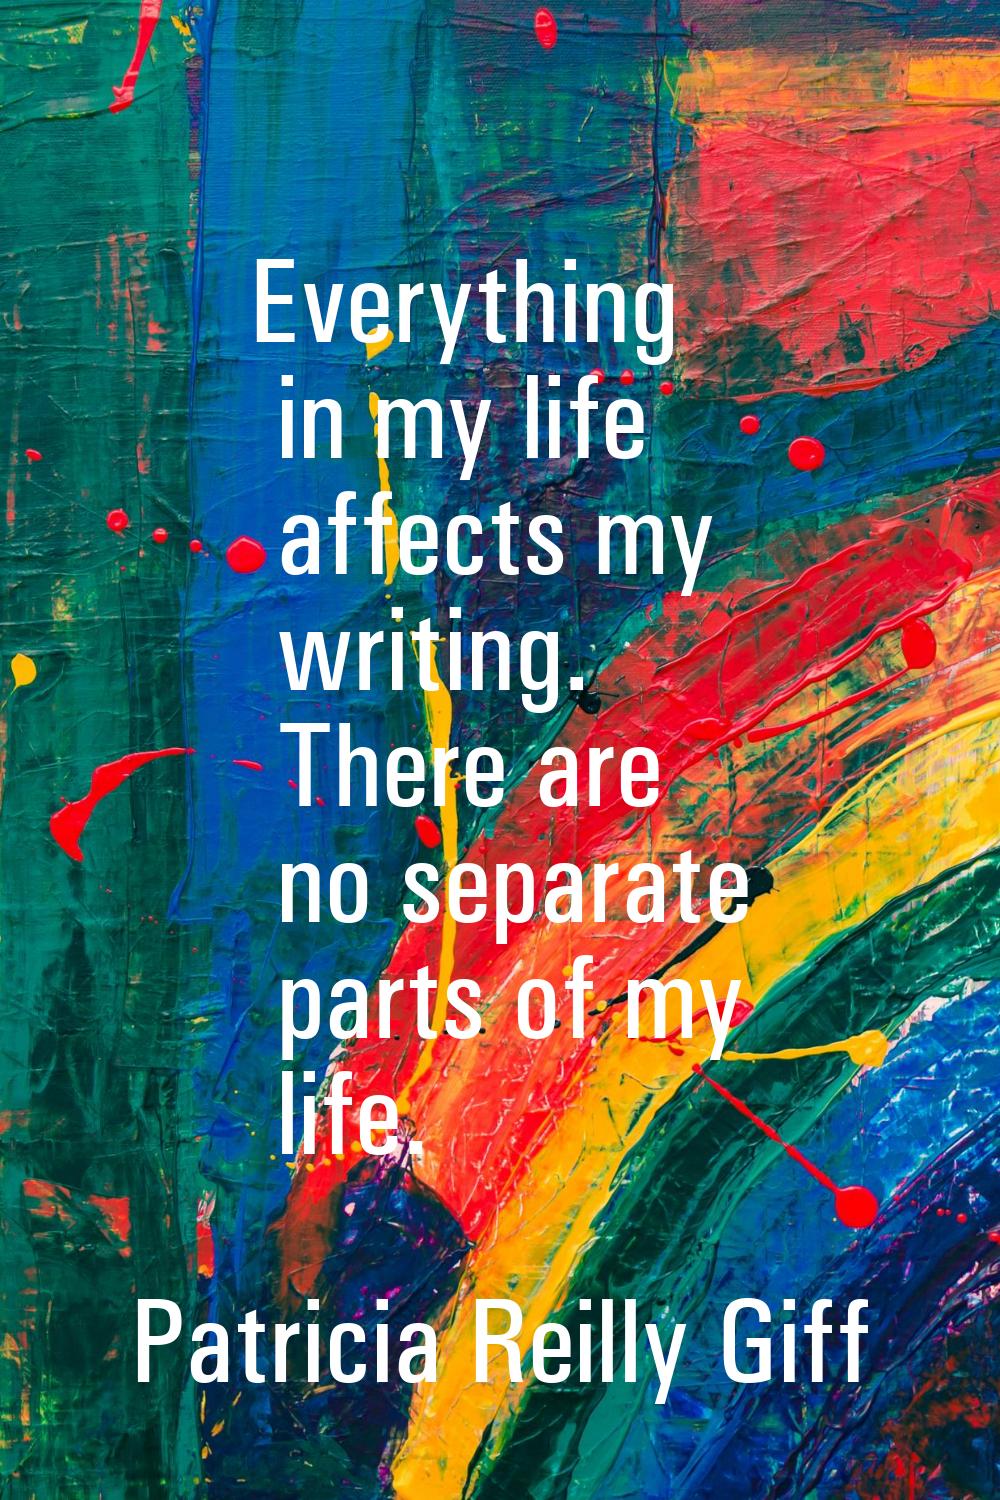 Everything in my life affects my writing. There are no separate parts of my life.